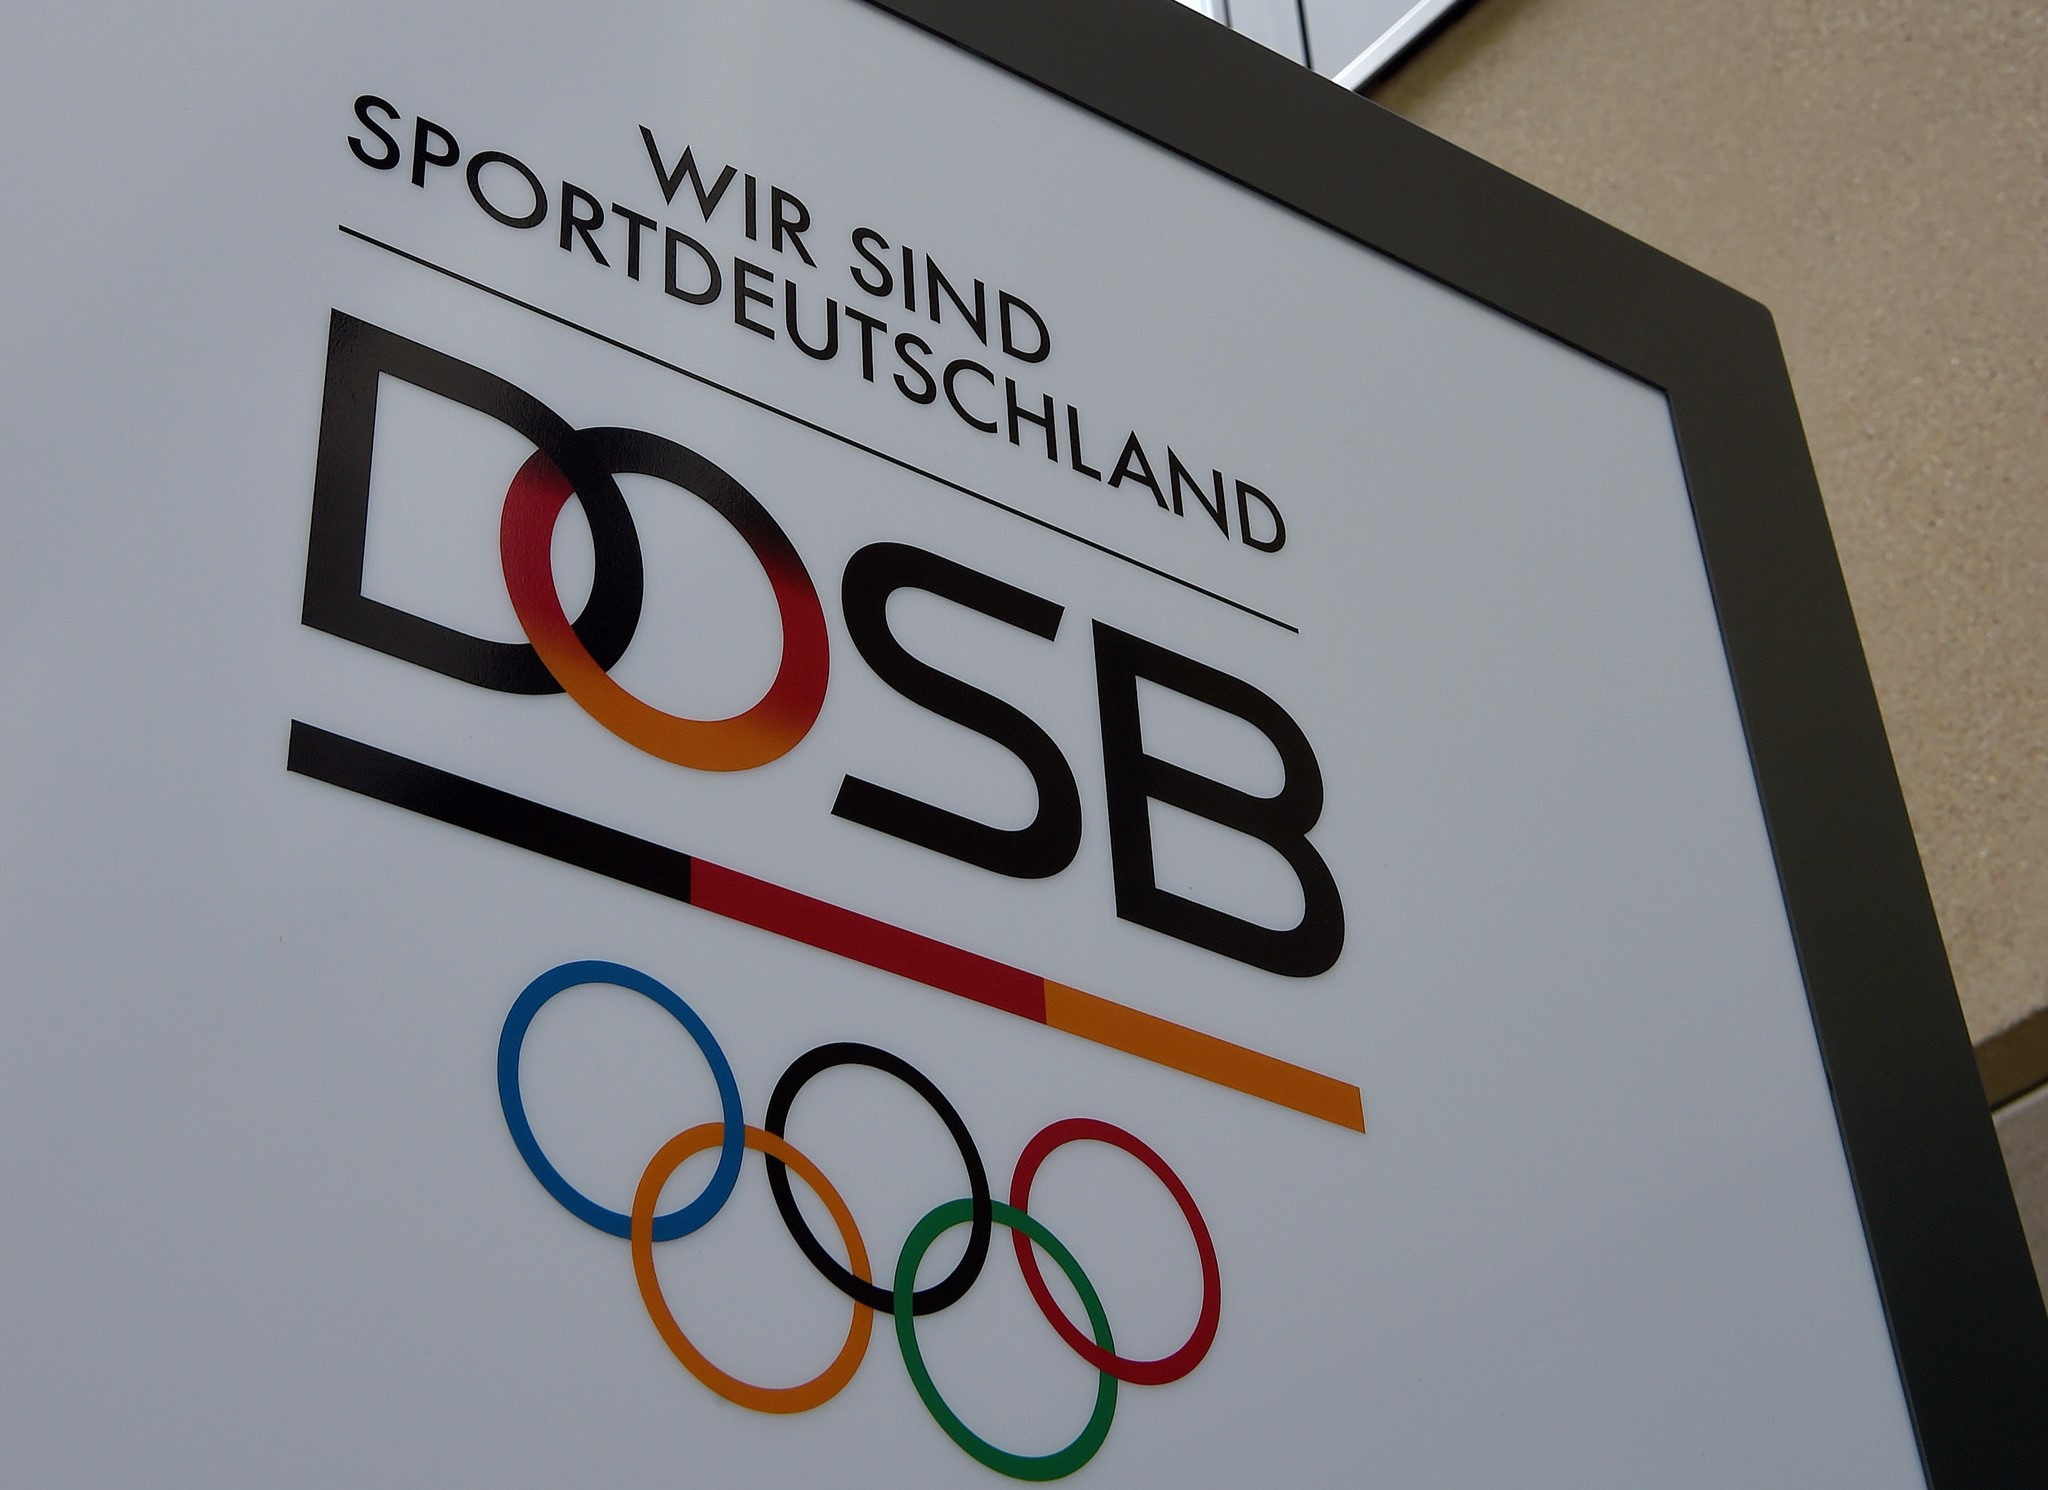 Germany set to prepare bid for Olympics after DOSB General Assembly vote